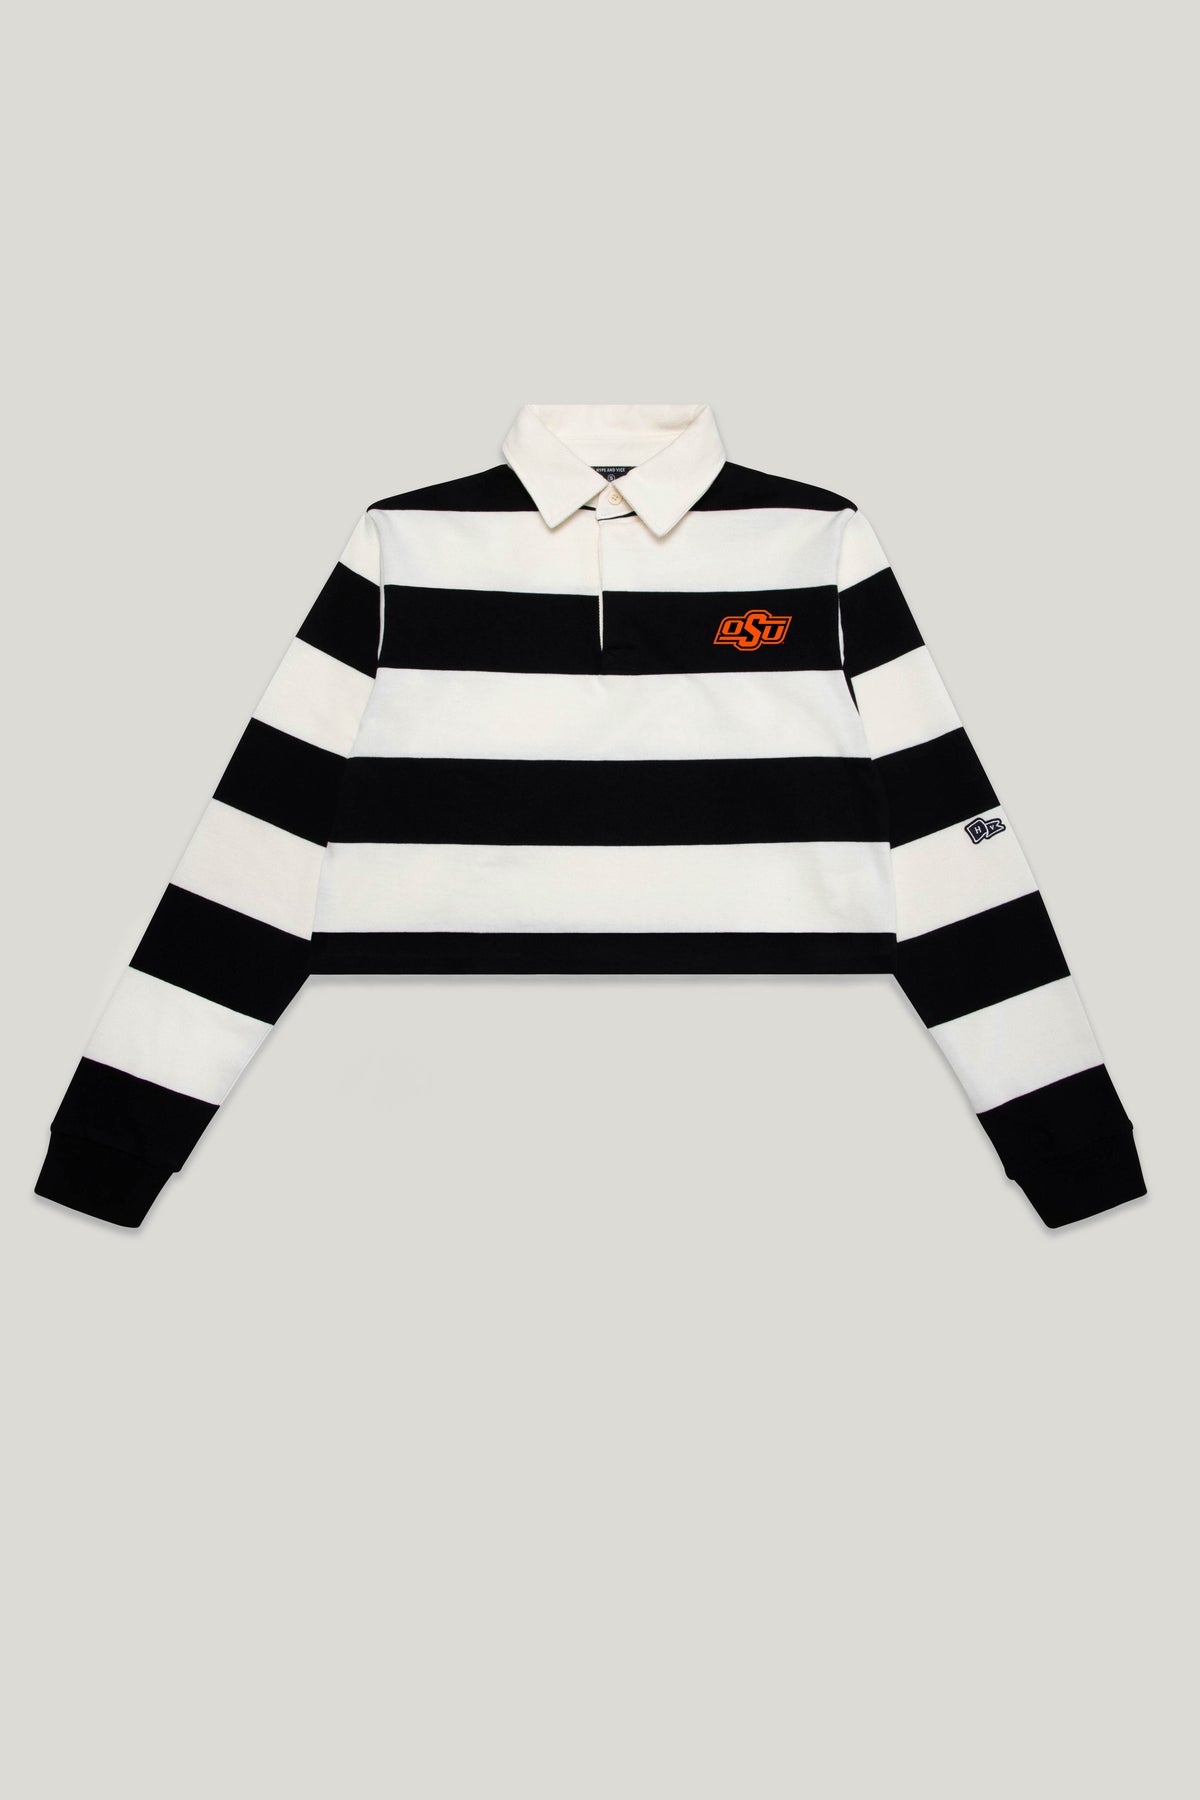 Oklahoma State University Rugby Top